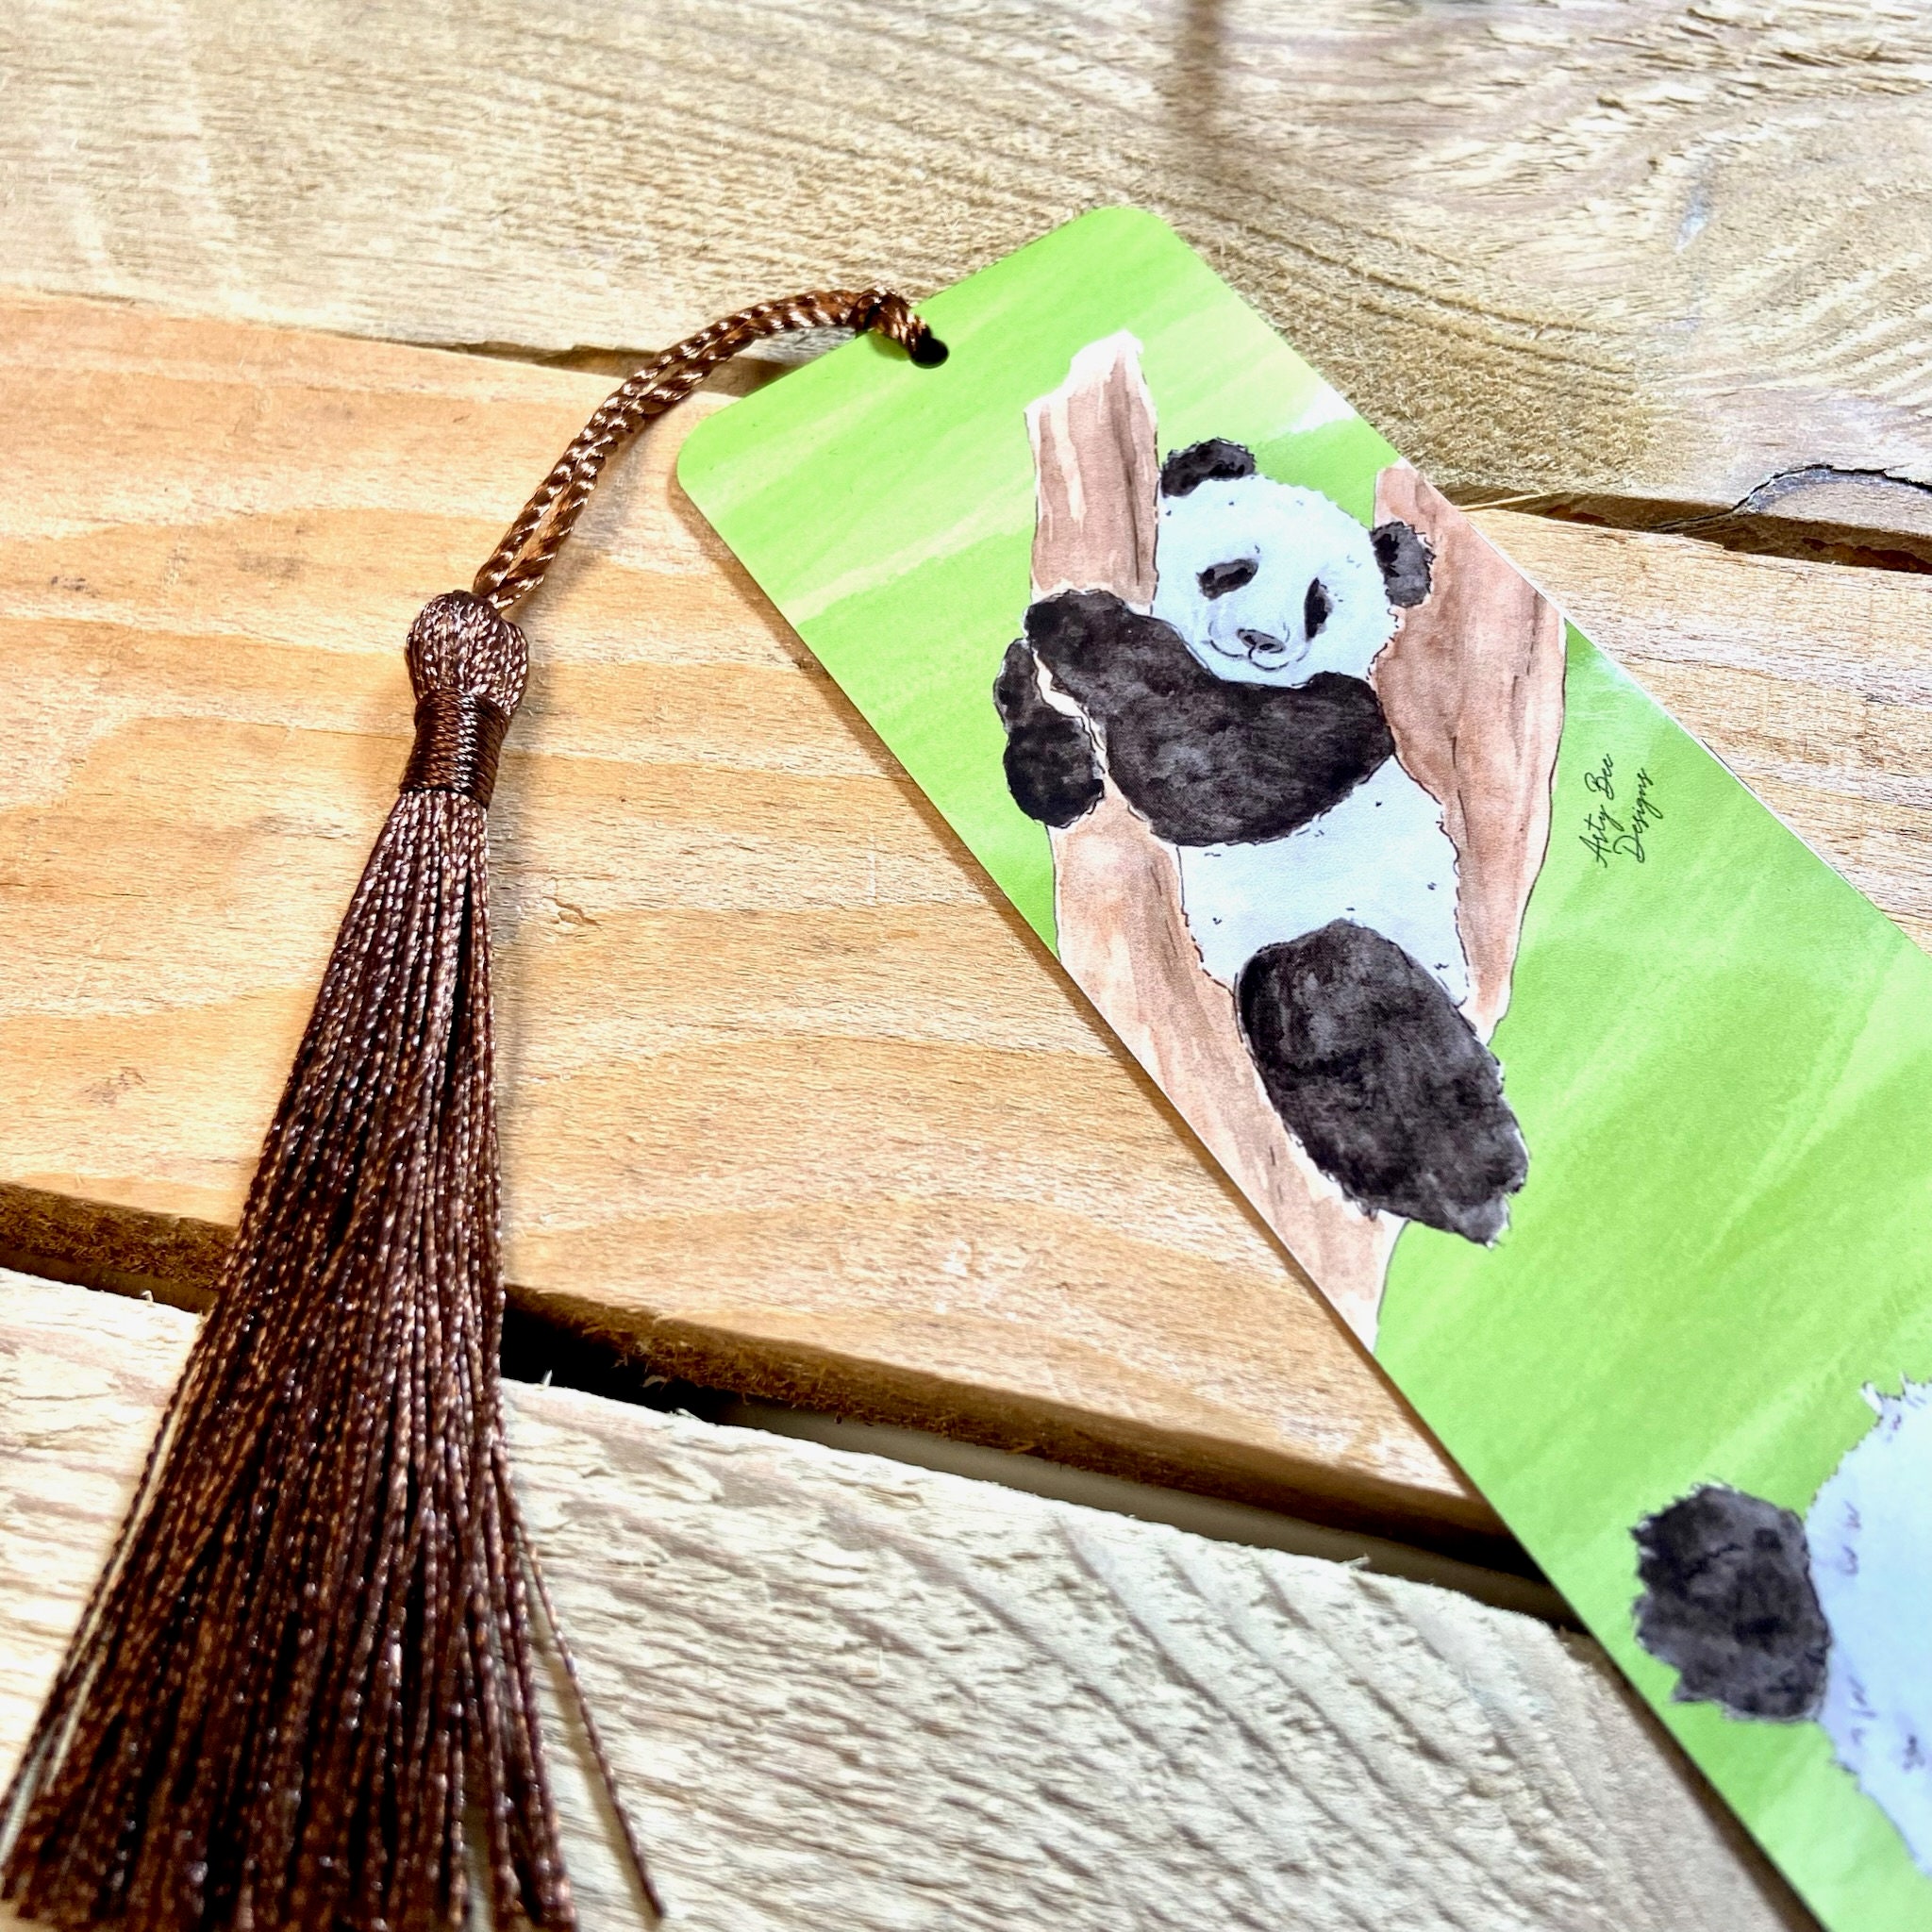  Bookmark Cute Bookmarks Book Markers Sets Page Halloween End of  Year Student Gifts from Teacher Appreciation Gifts Gifts Under 10 Dollars  Cute Panda Bookmark(Color:Phoenix) : Office Products